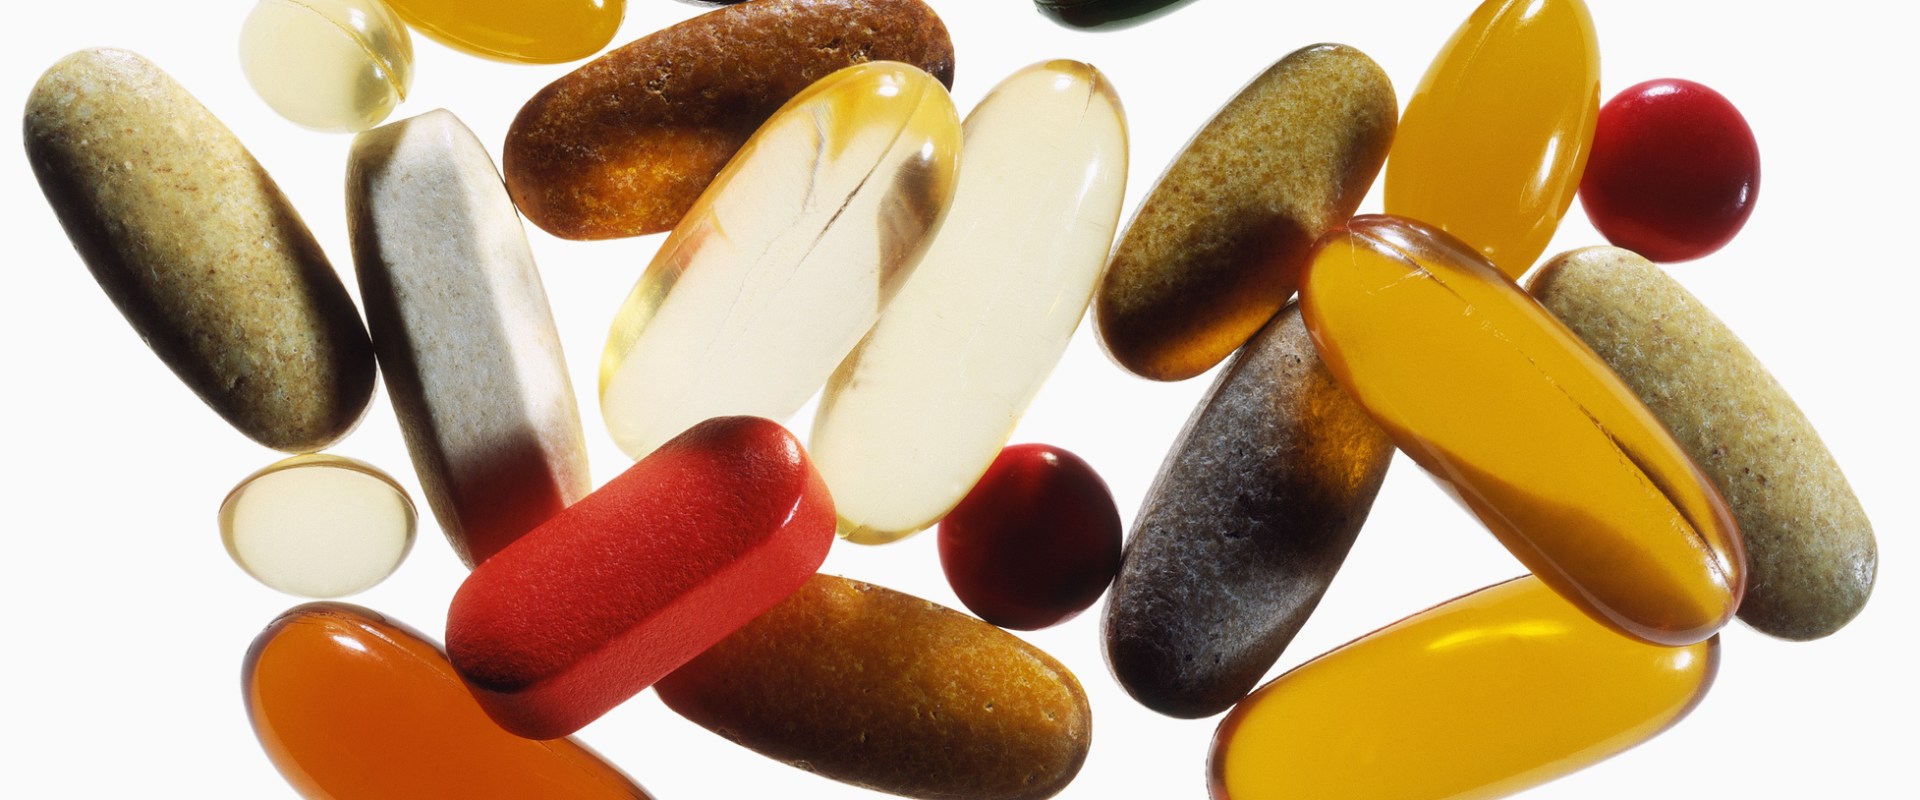 Are Daily Supplements Good or Bad for You?